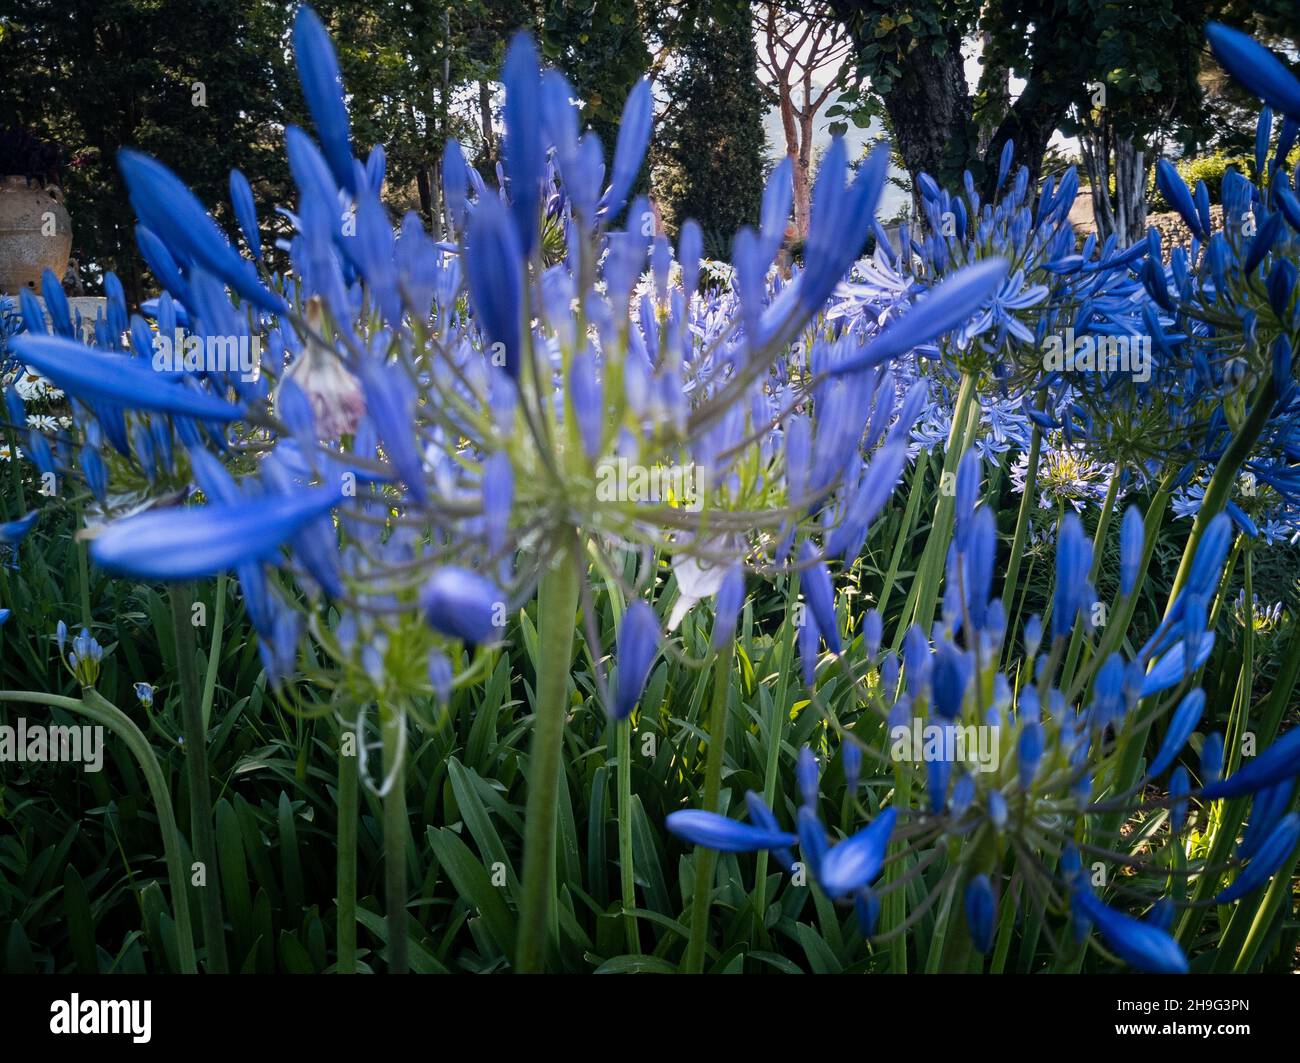 Blue trumpet flowers of Agapanthus plant blooming in a garden in Ravello on the Amalfi coast Stock Photo